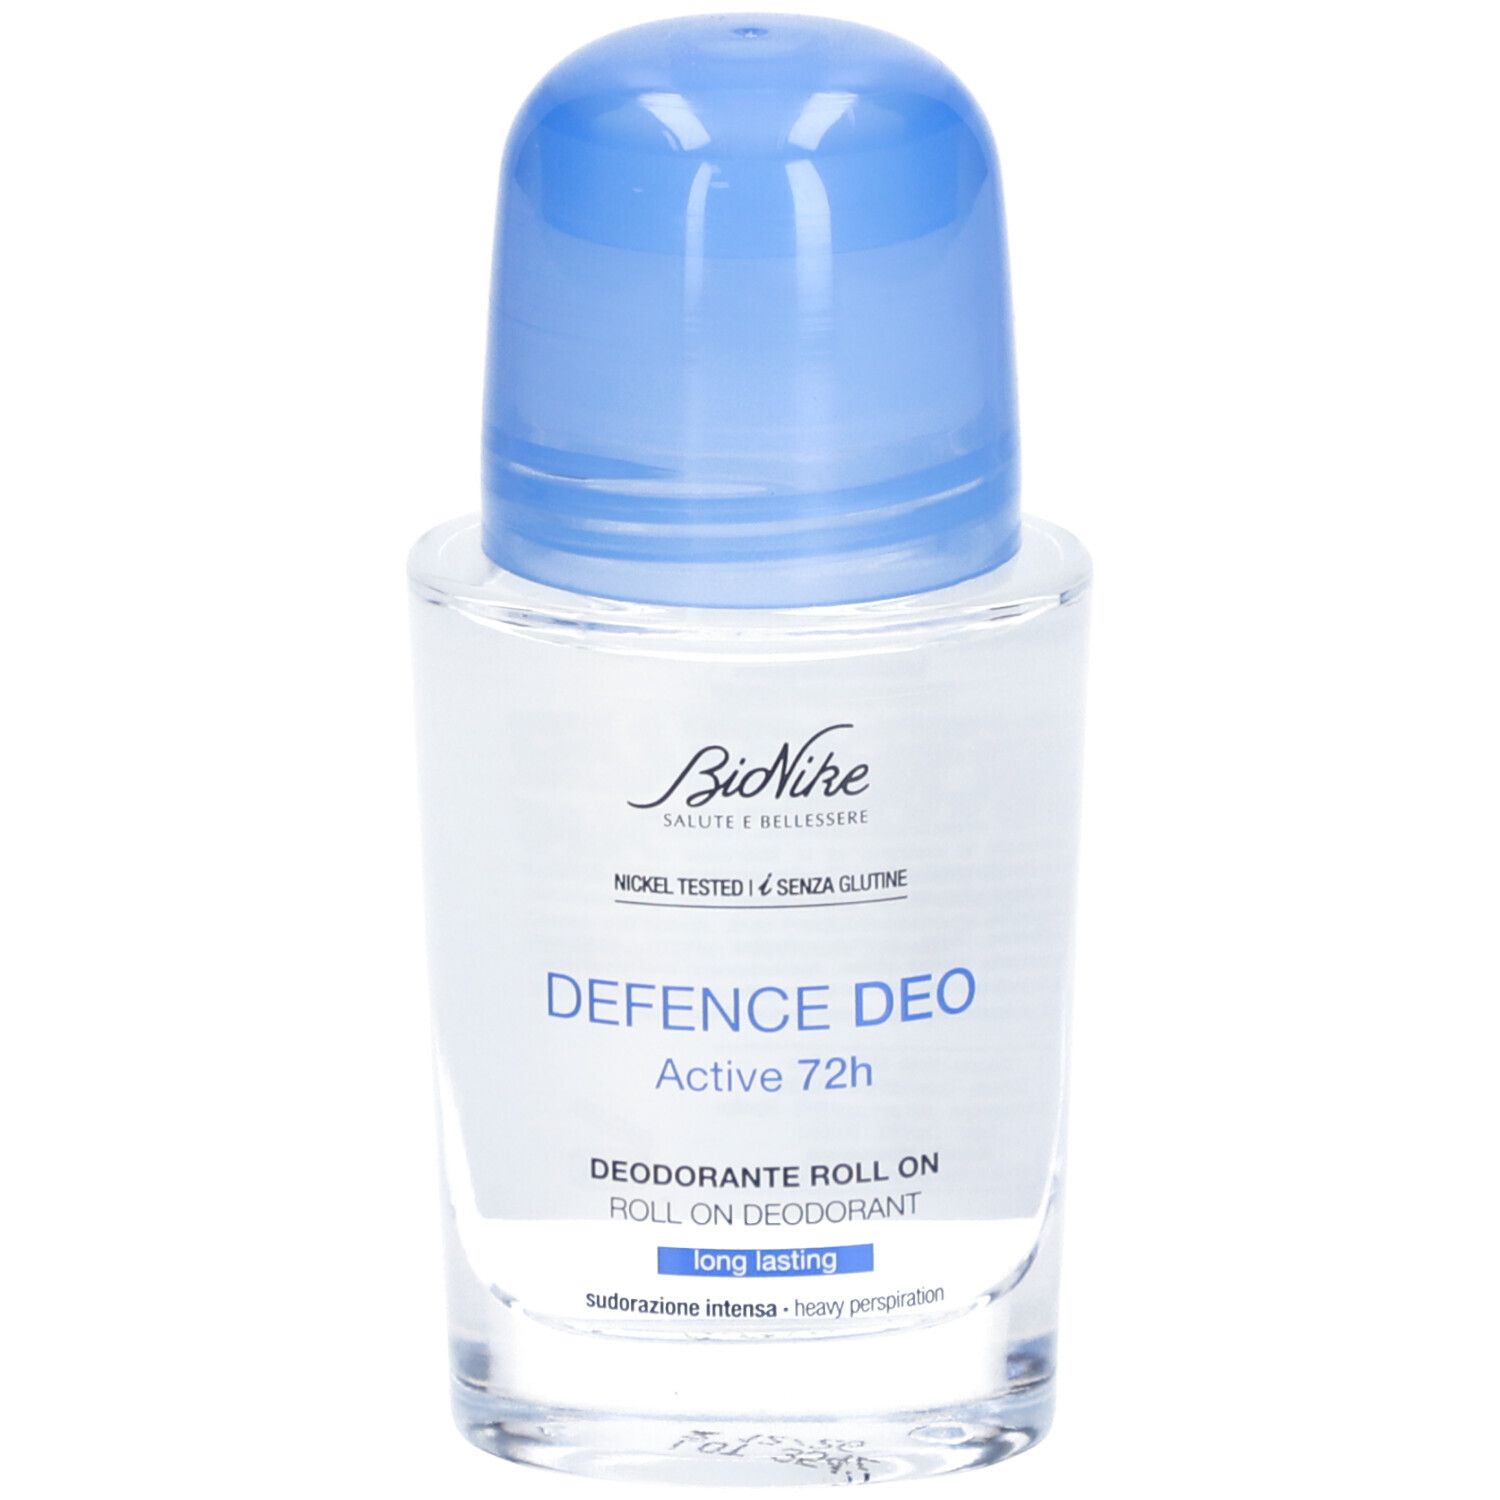 BioNike DEFENCE DEO ACTIVE 72h Roll-On